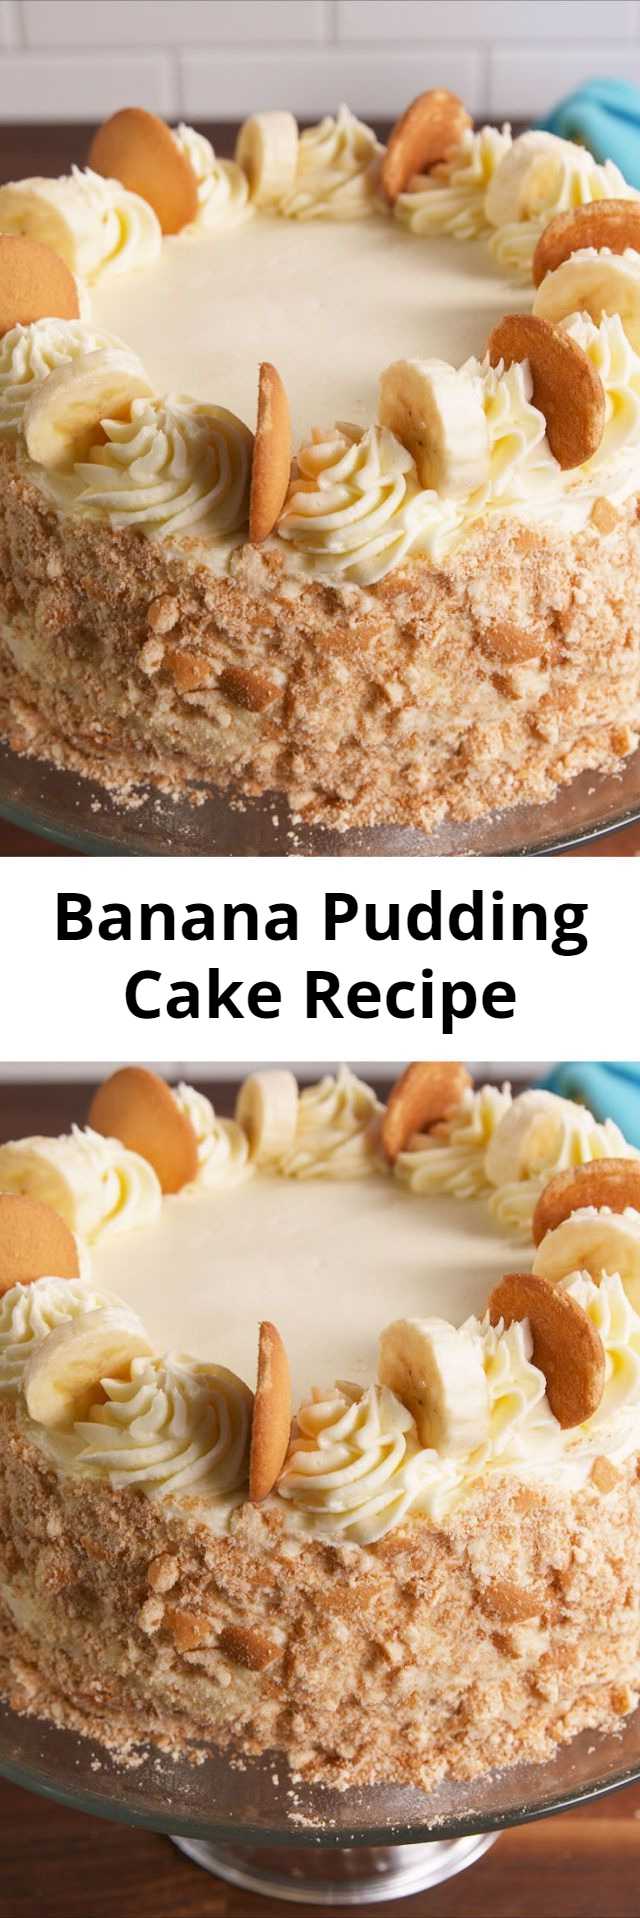 Banana Pudding Cake Recipe - Though it will be hard, try to resist adding a ton of pudding in between the layers. Otherwise, things will get pretty messy. If that means there's extra pudding left over, so be it. We know you'll find some use for it.